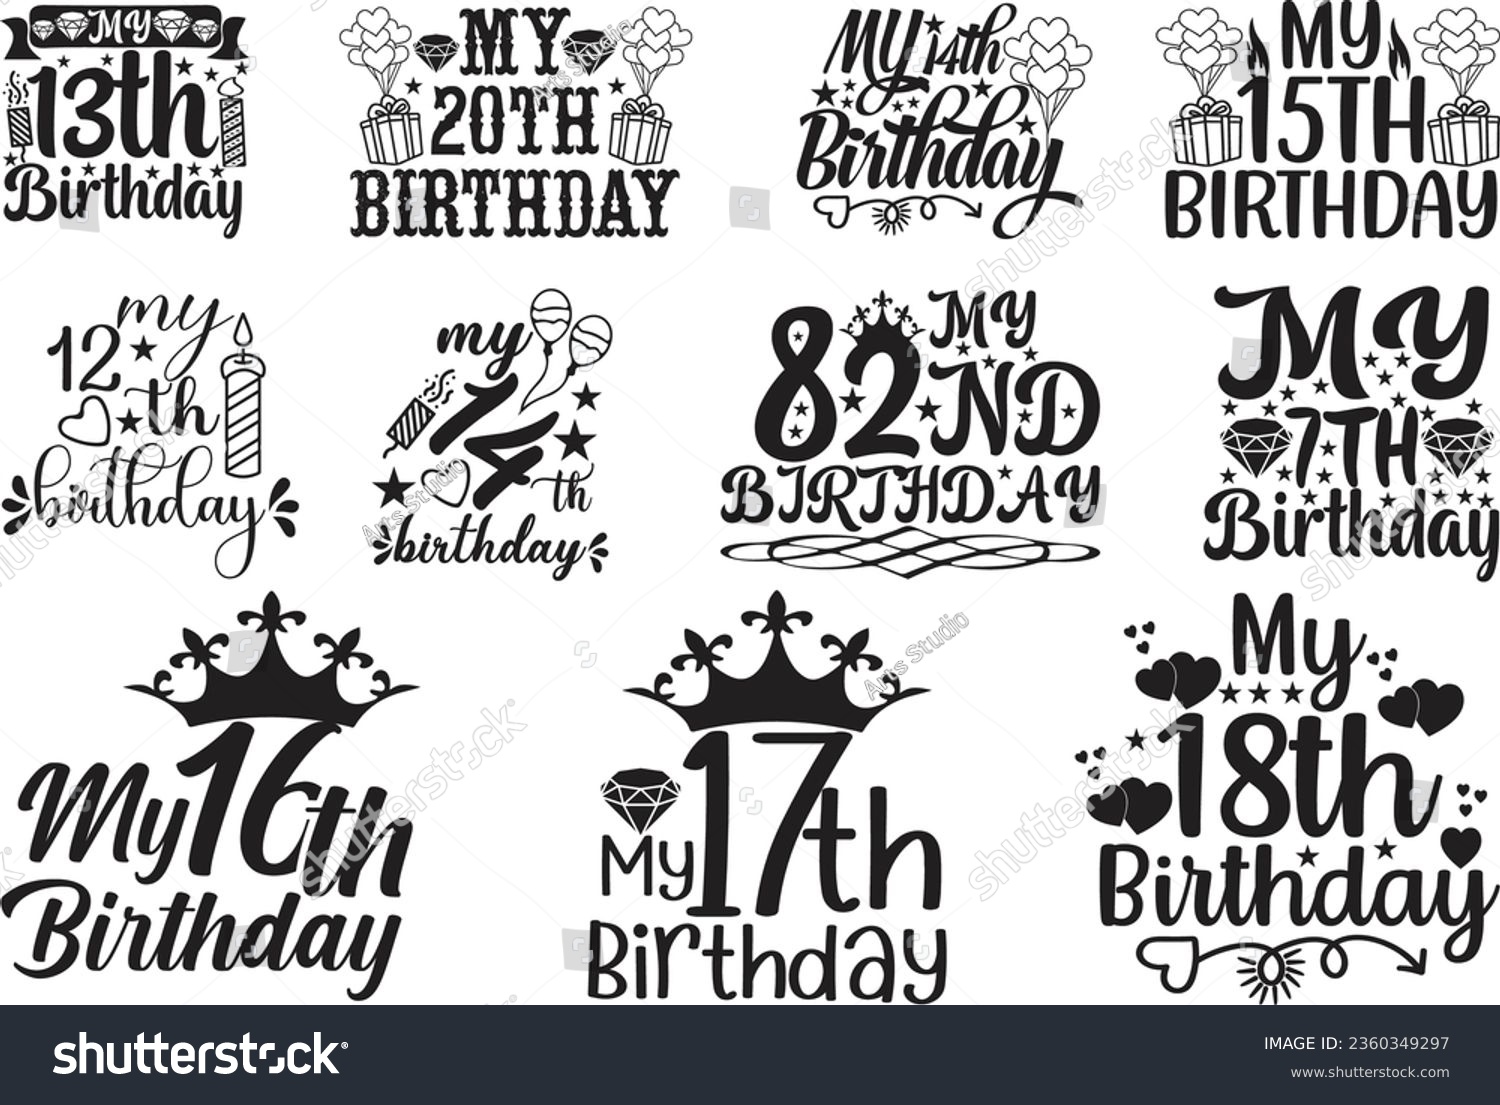 SVG of Happy Birthday T-shirt And SVG Design Bundle, Happy Birthday card design elements. Birthday party design for Vector graphic design. Vector EPS Editable File Bundle, can you download this bundle svg